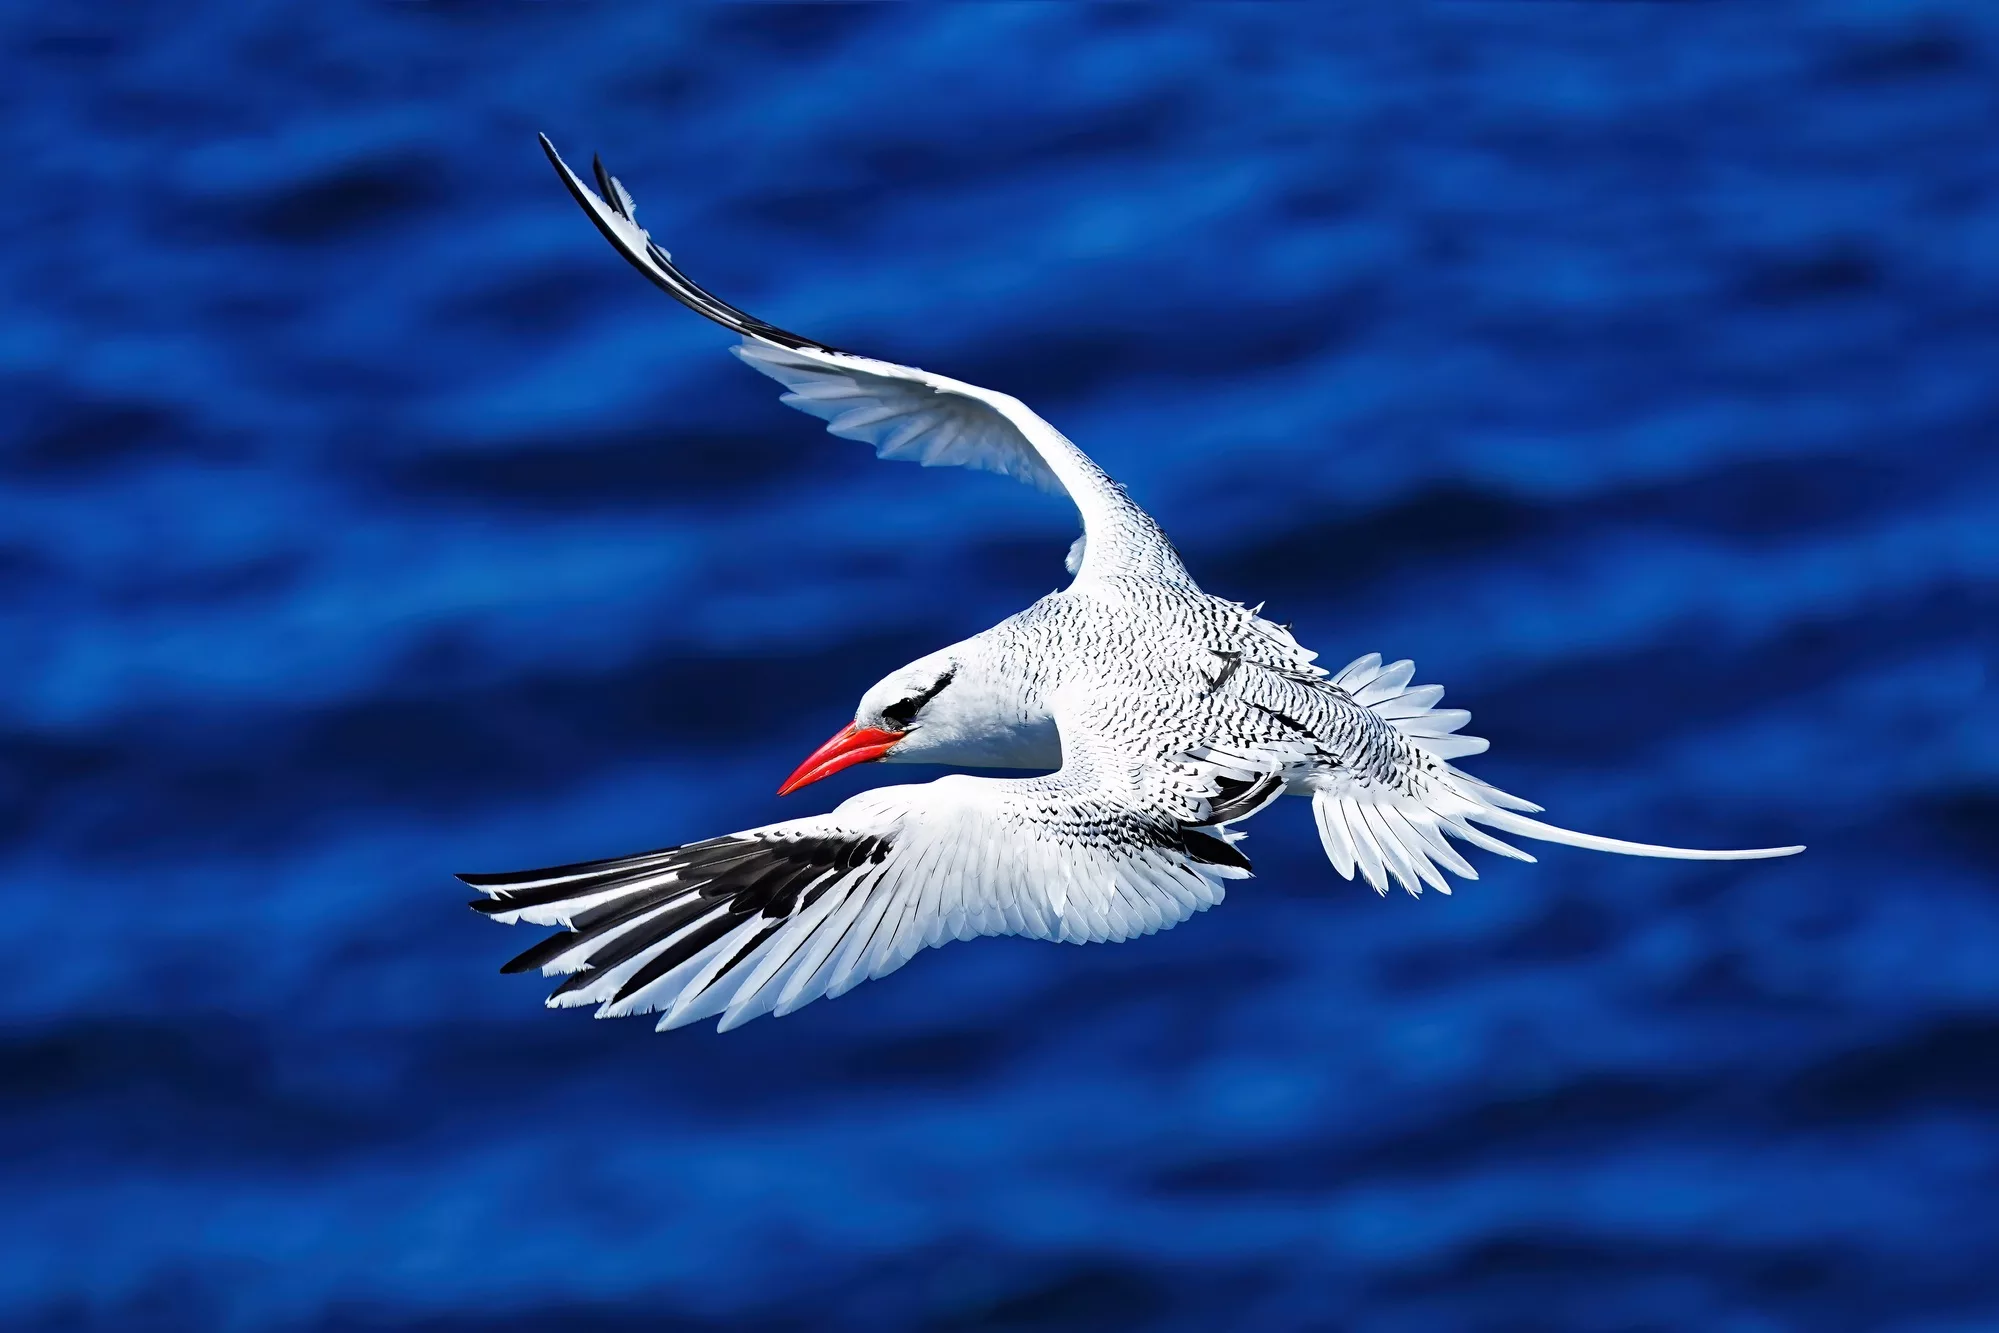 Galapagos Islands Yacht-Based Tour & Guided Photography Experience - Red-billed Tropic bird